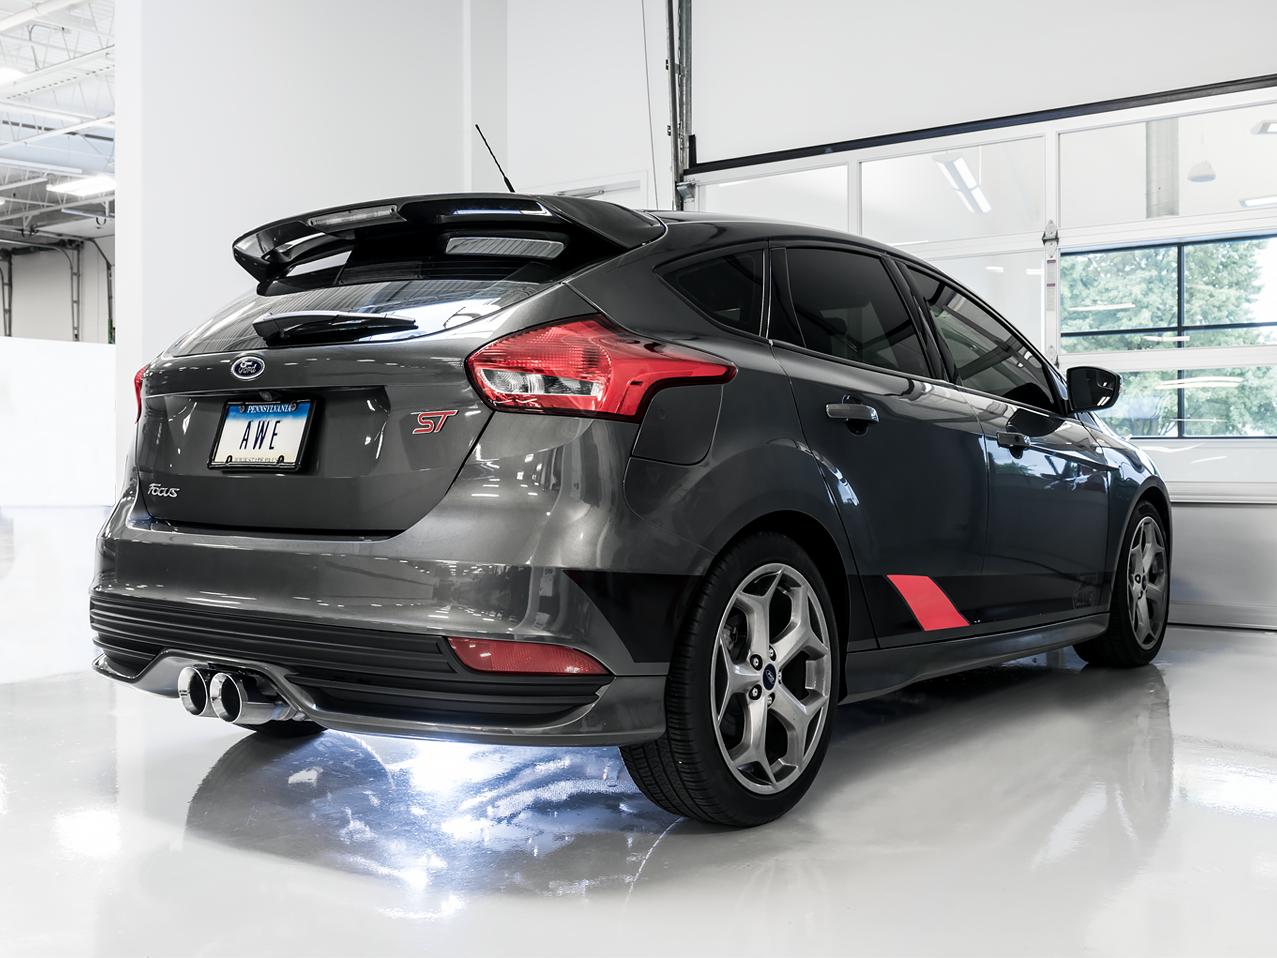 AWE Touring Edition Cat-back Exhaust for Ford Focus ST - Resonated - Chrome Silver Tips